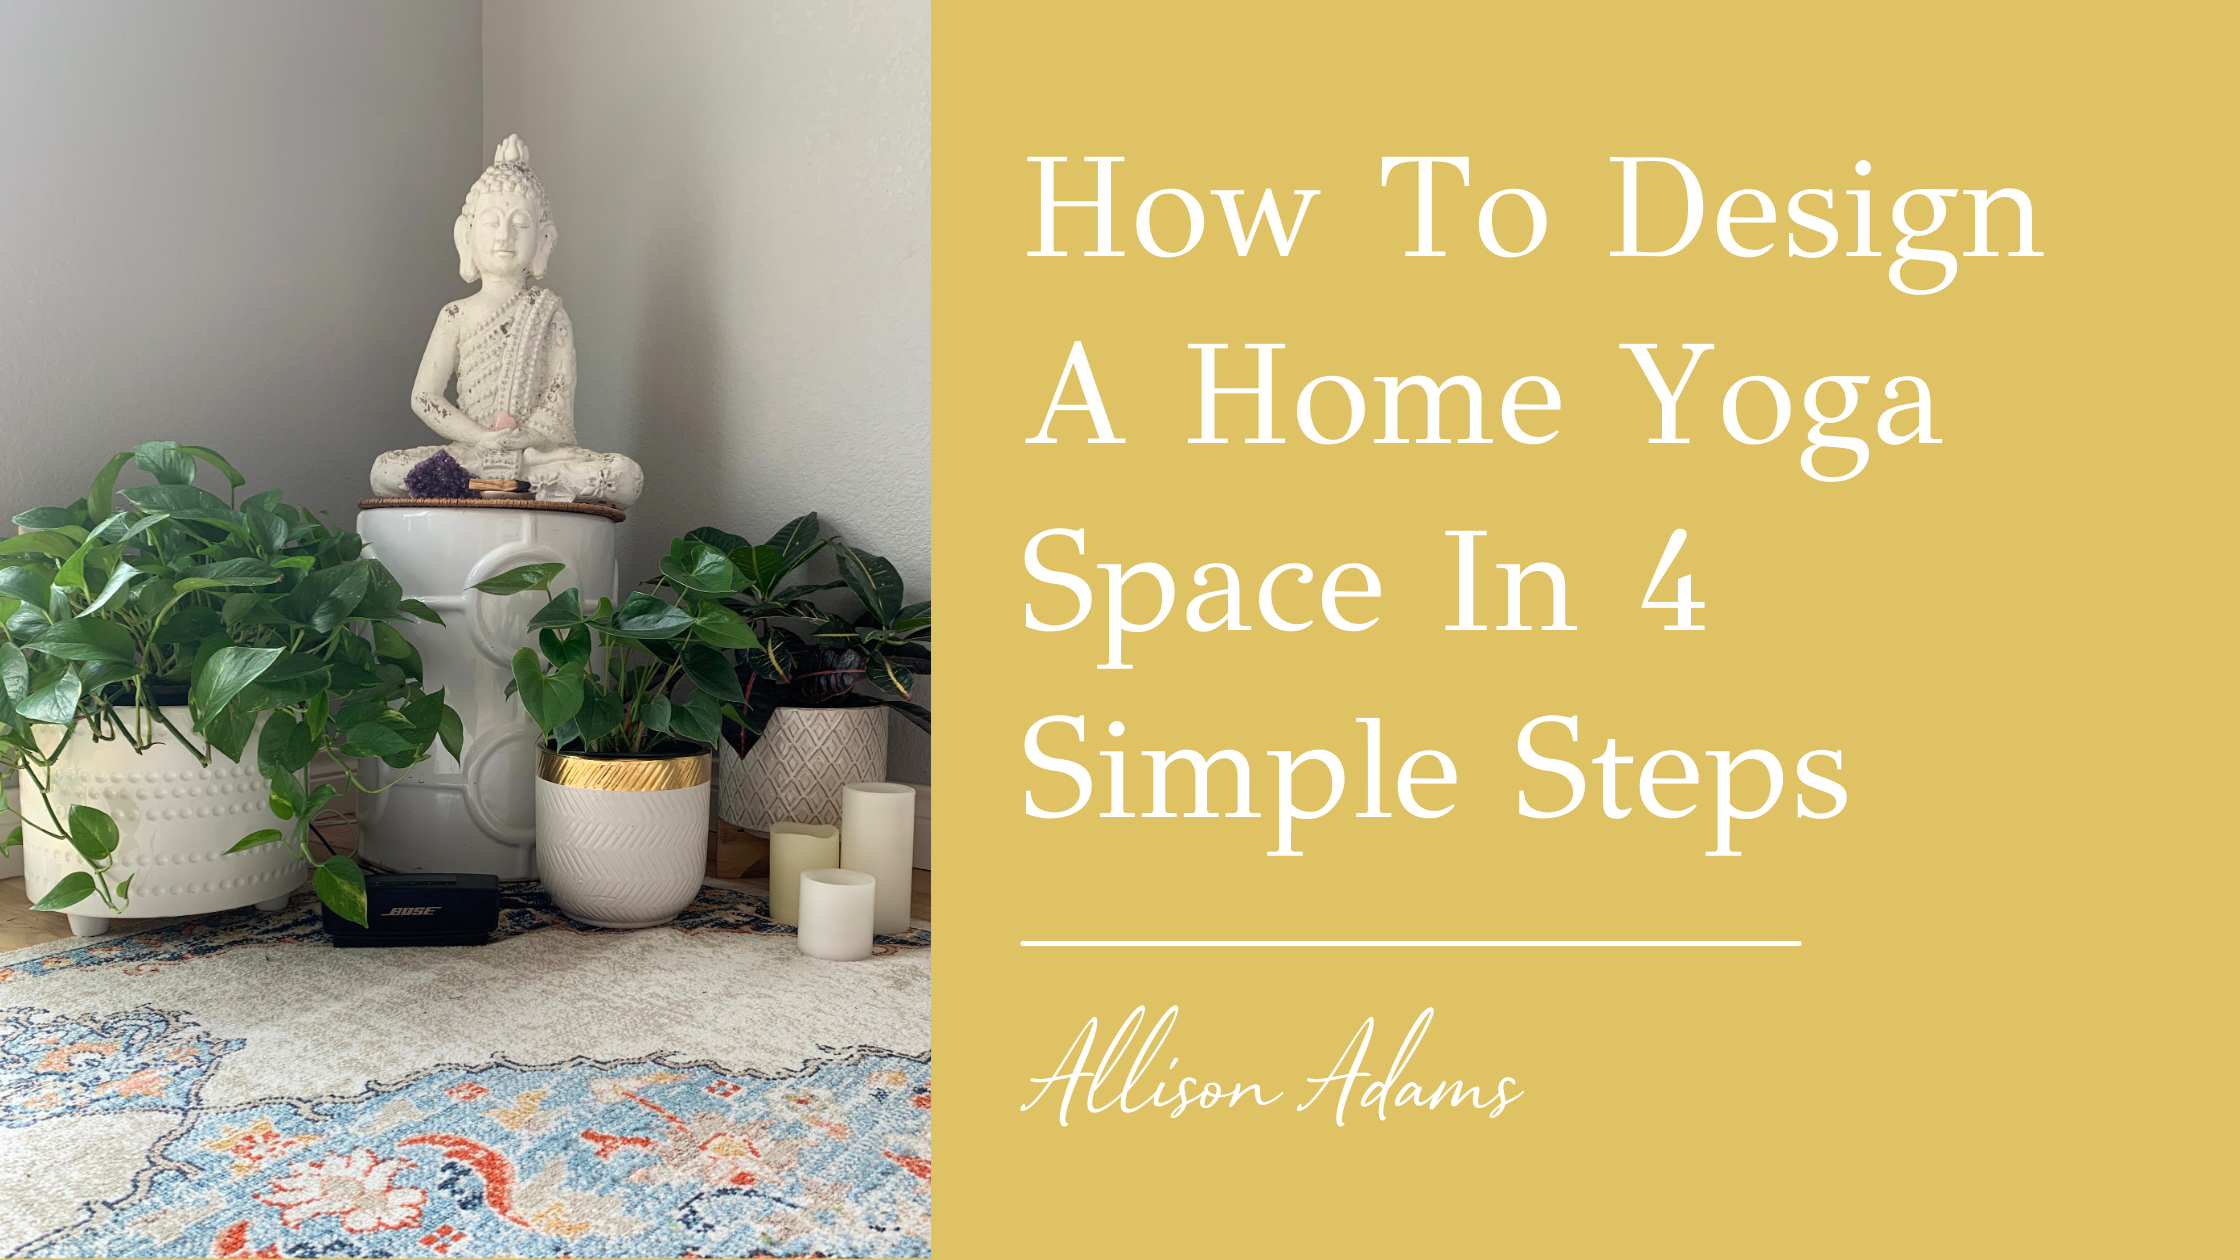 How To Design A Home Yoga Space In Four Simple Steps